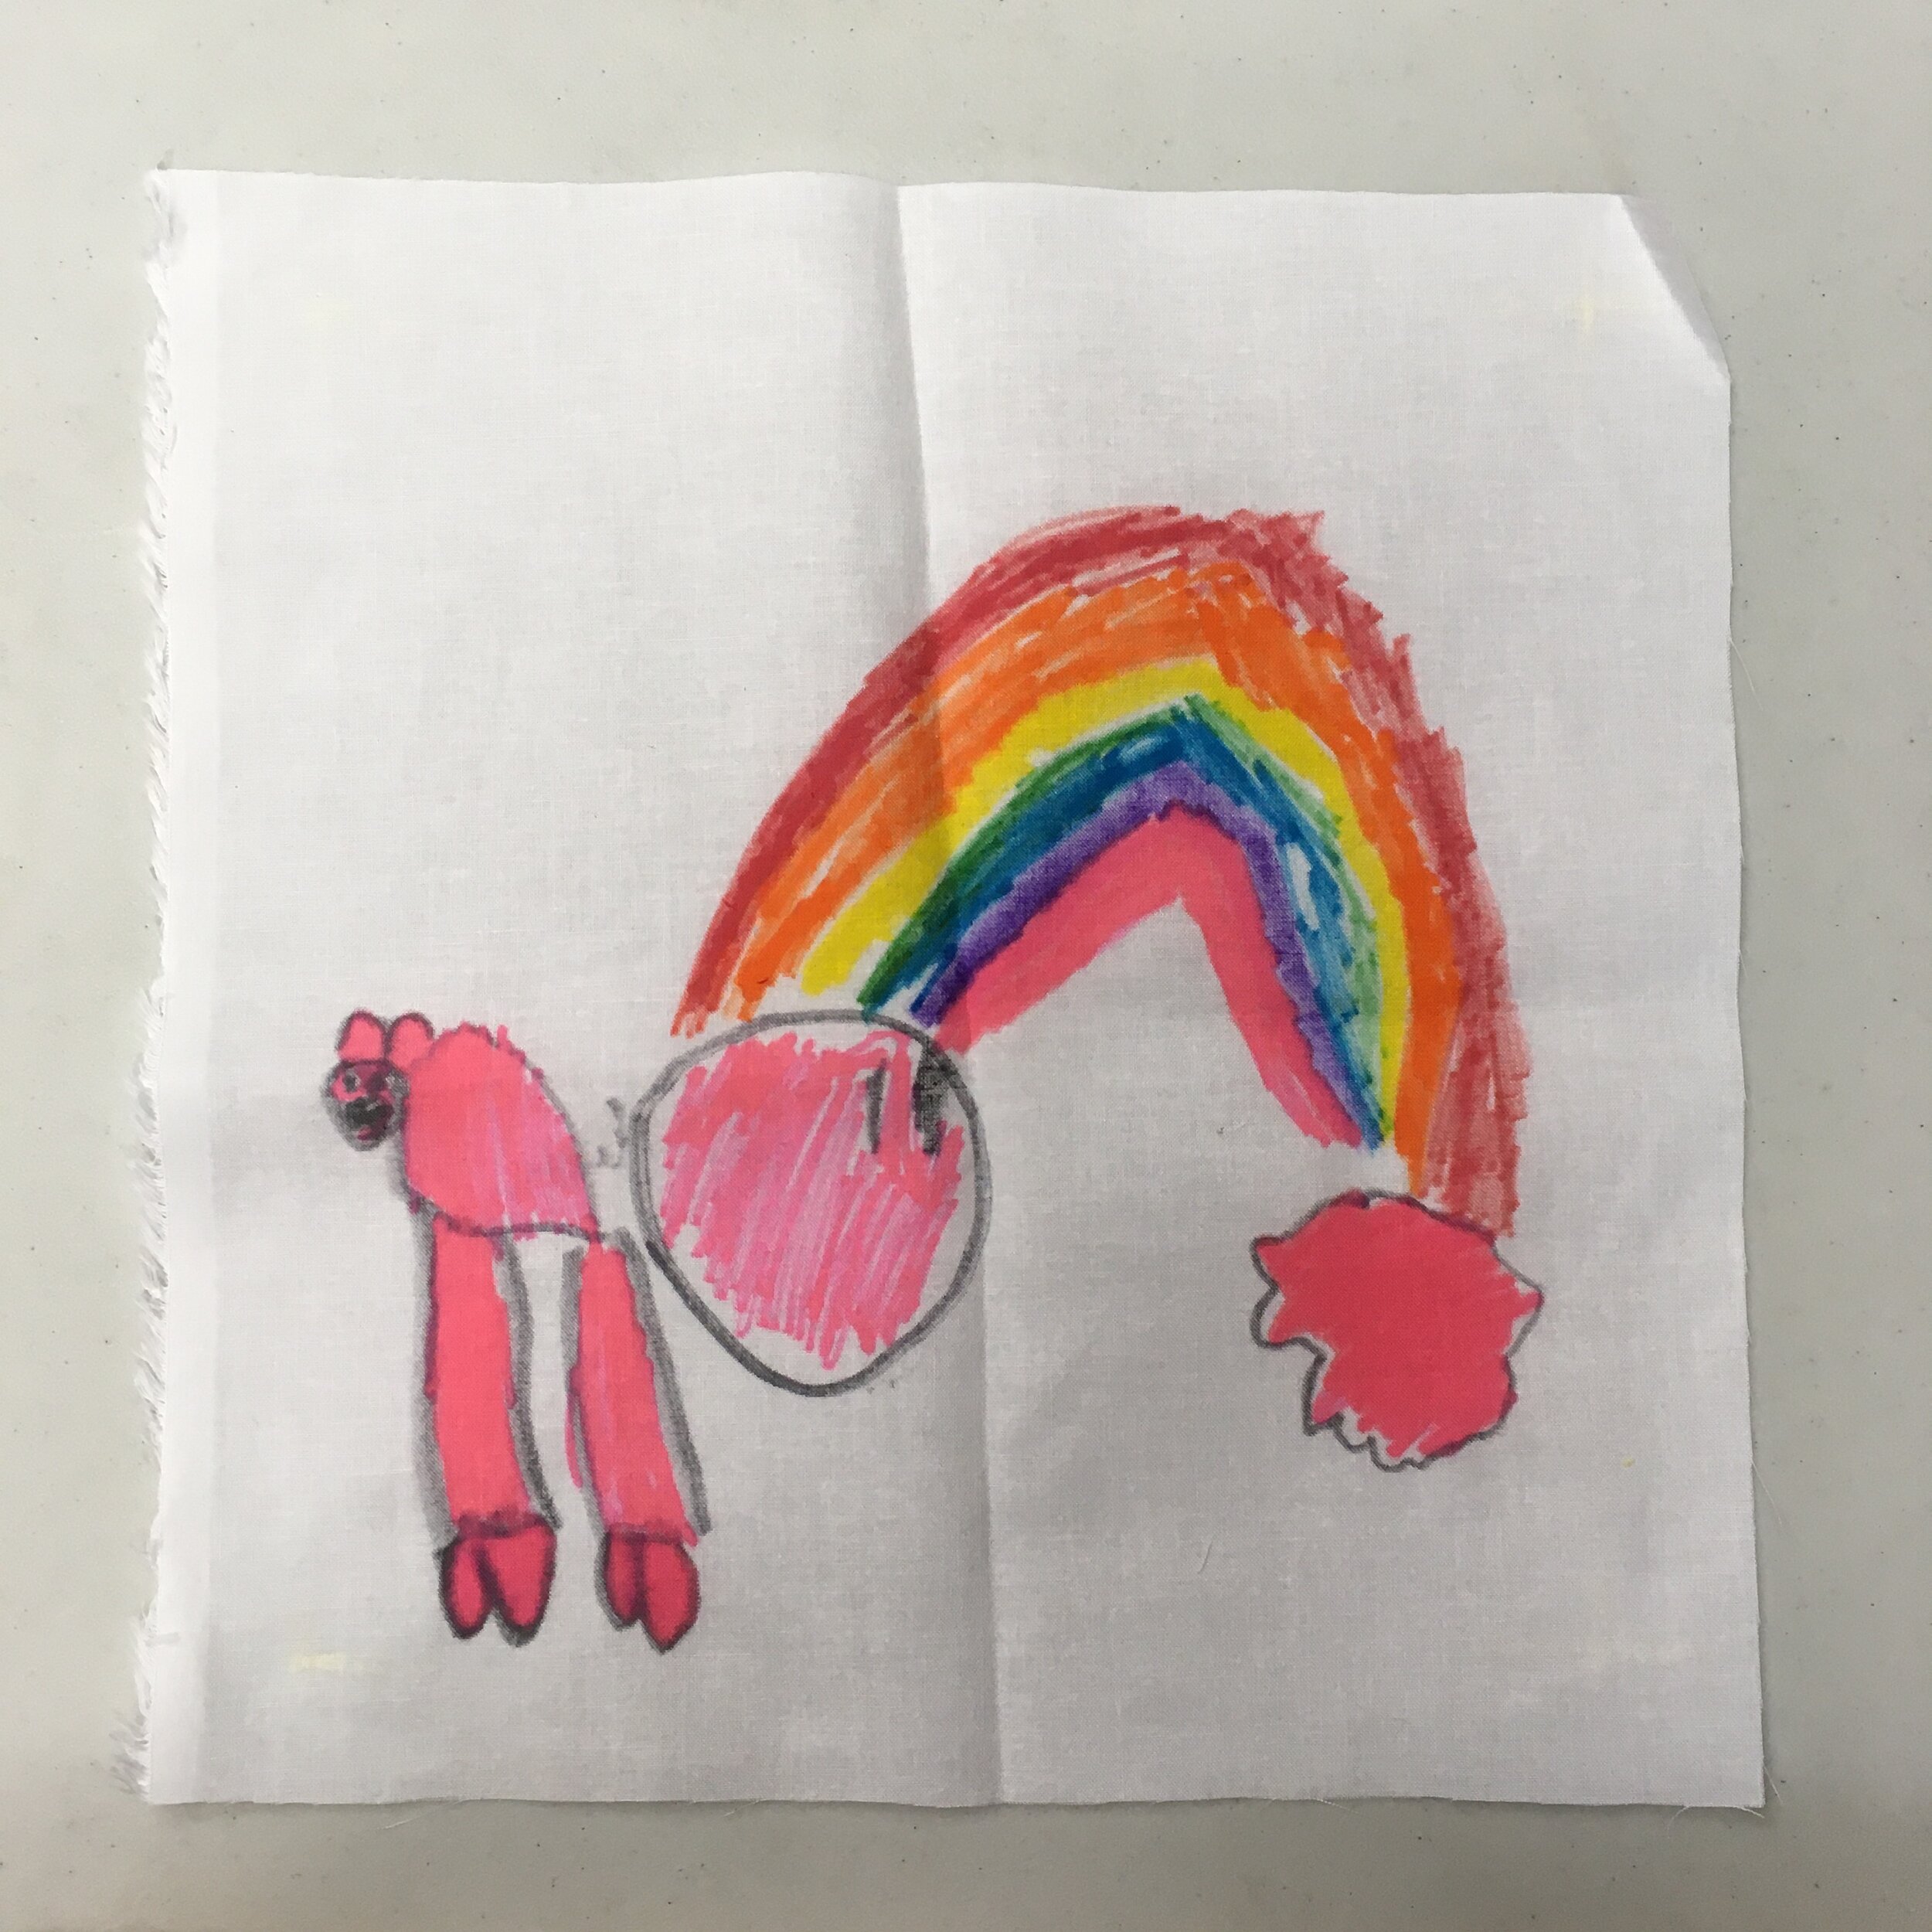 Ayla K (5 years old) 'Rainbow and Pig" 